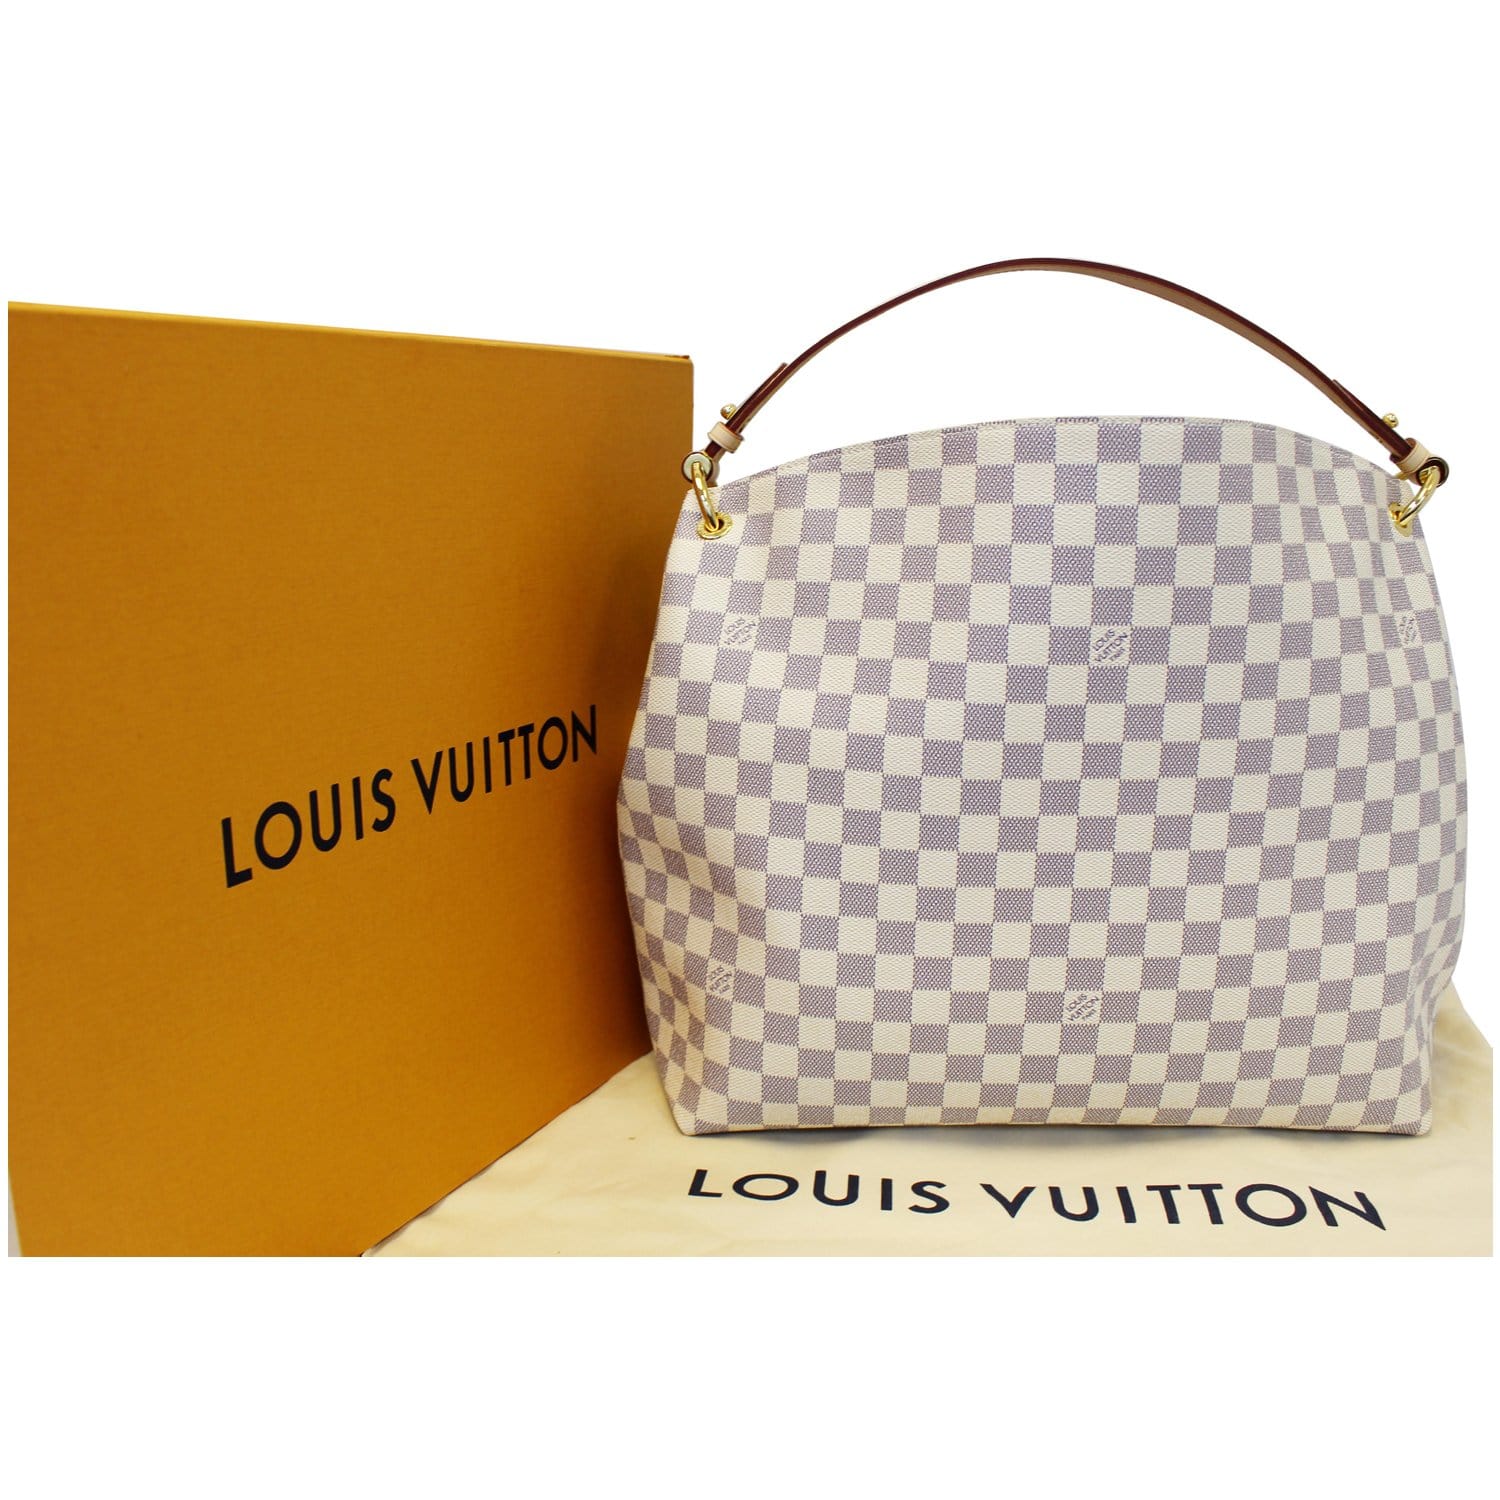 Louis Vuitton Damier Azur Graceful MM. Authenticated by Entrupy. Call our  store or come see us for more info! 1601 Woodruff Road, Ste D…